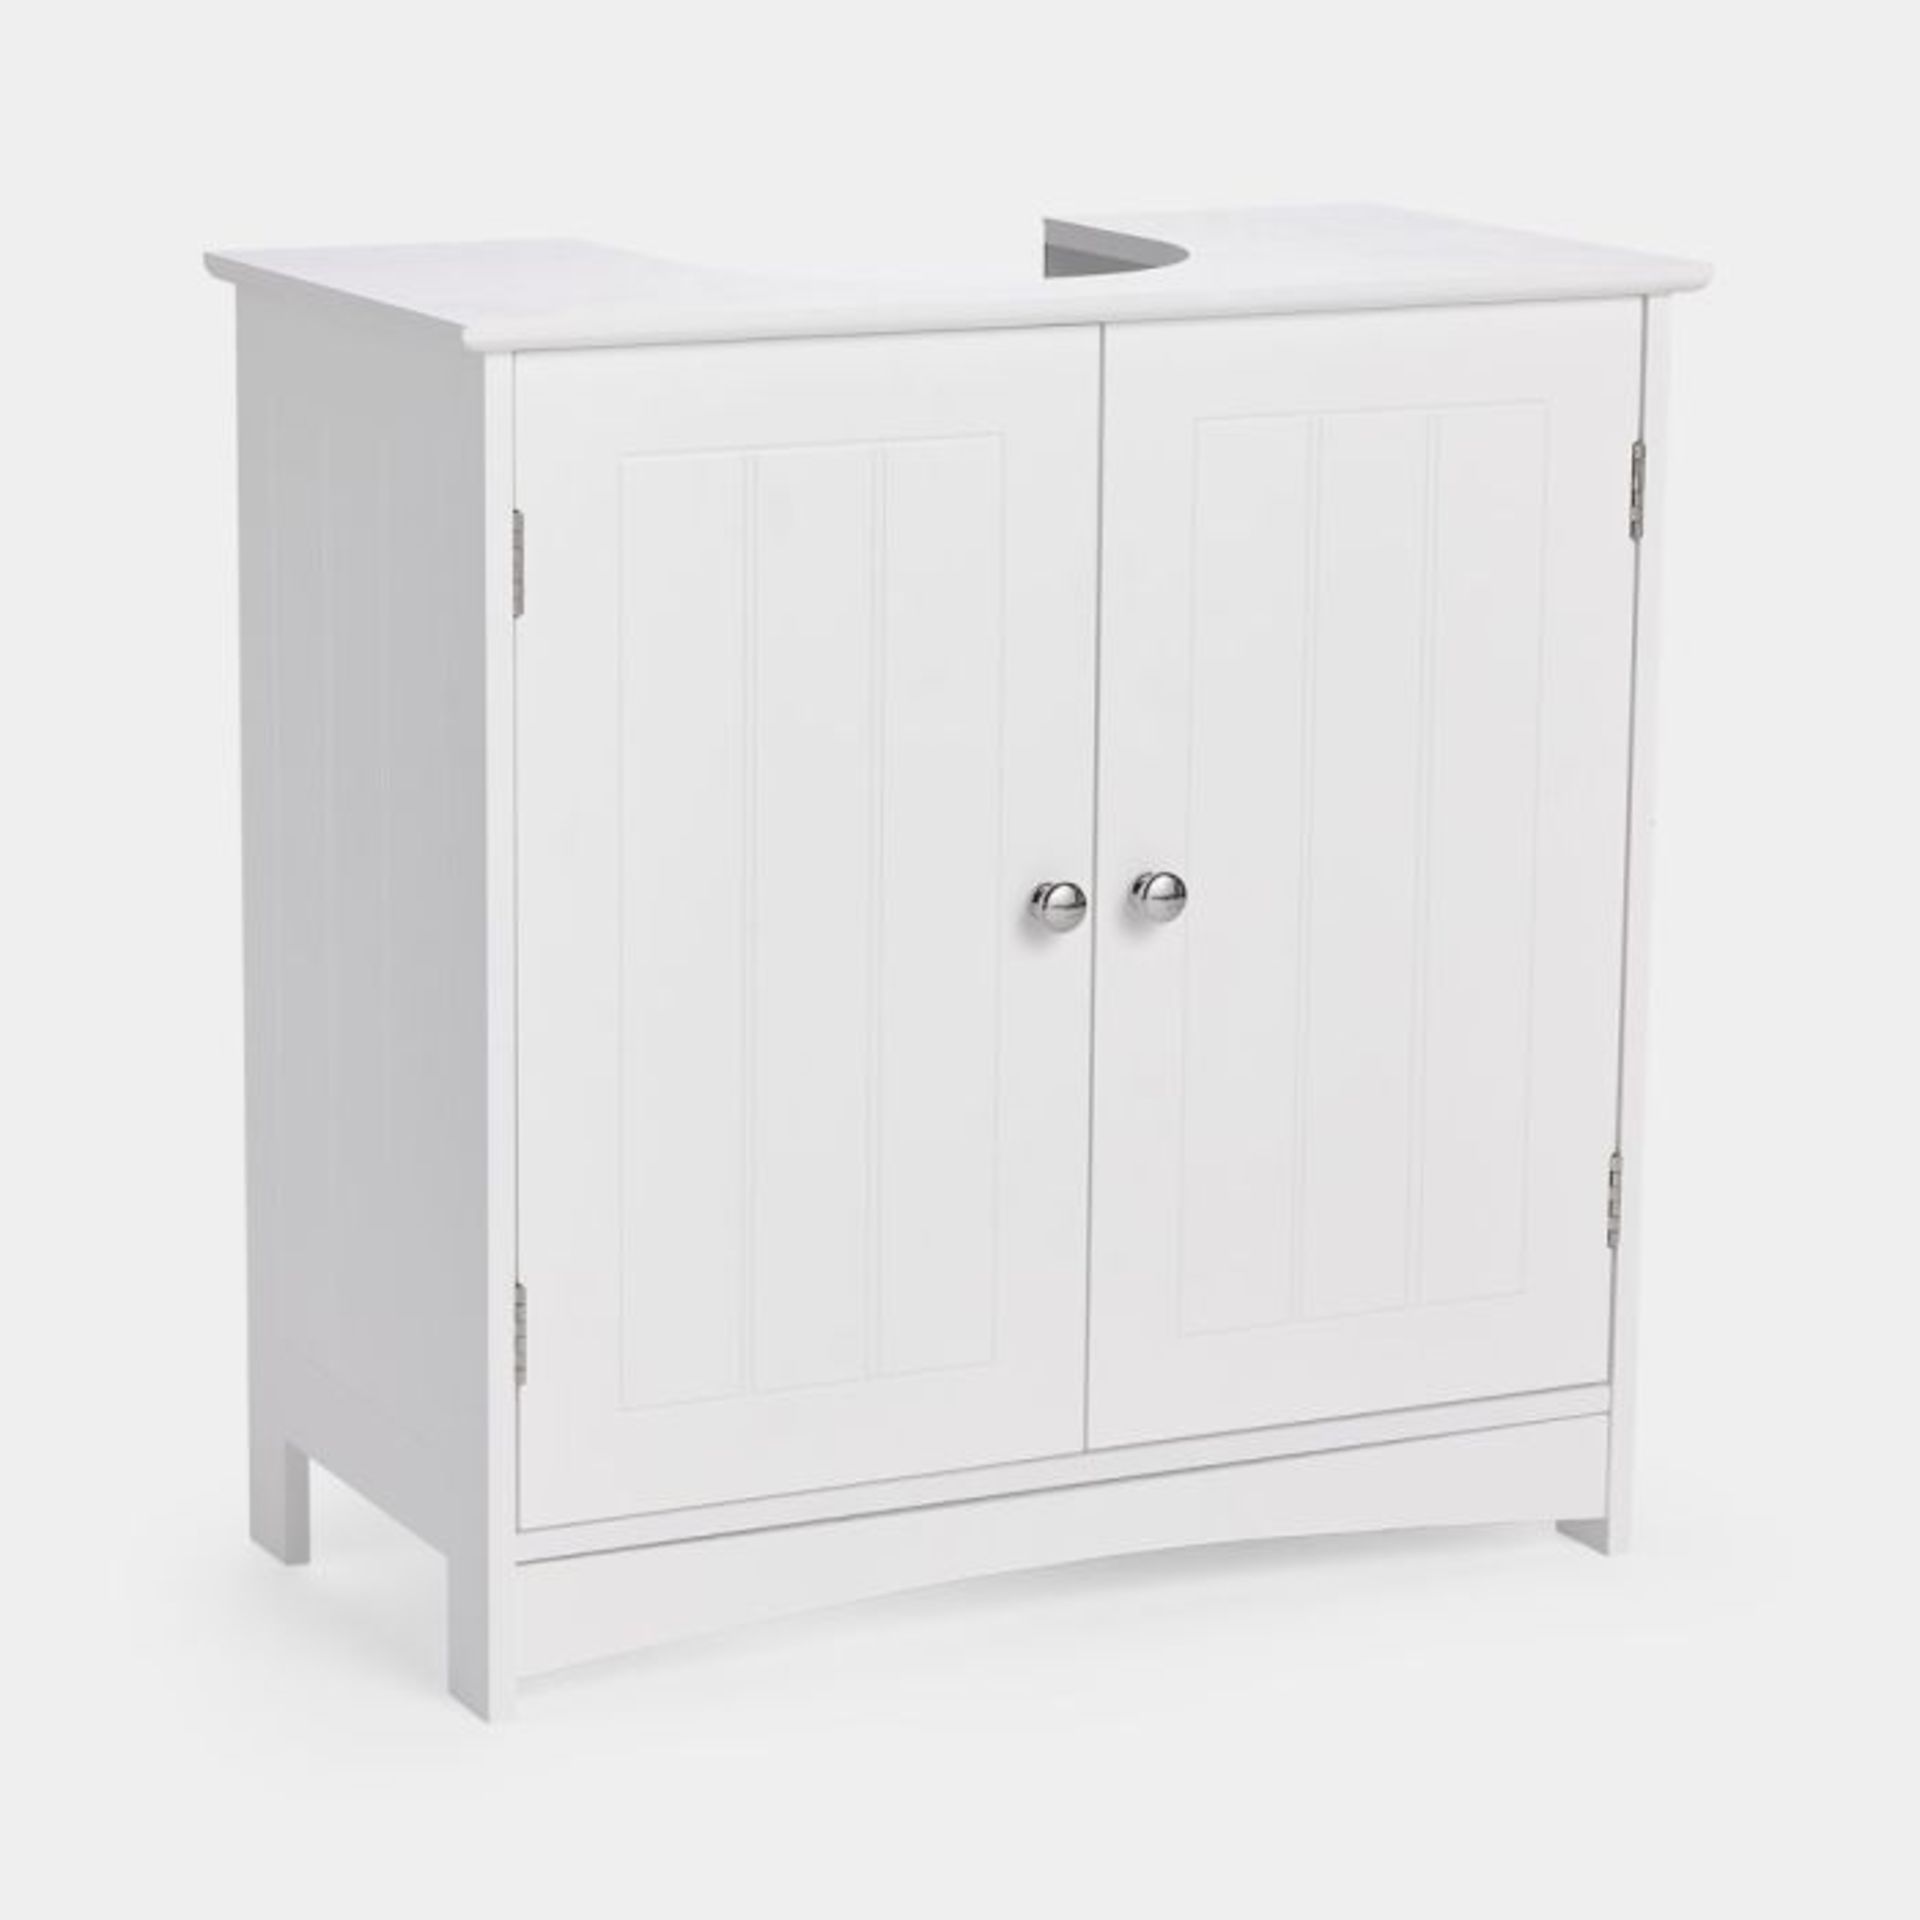 Holbrook White Under Sink Basin Cabinet. - ER34. Organise your bathroom in style using our White